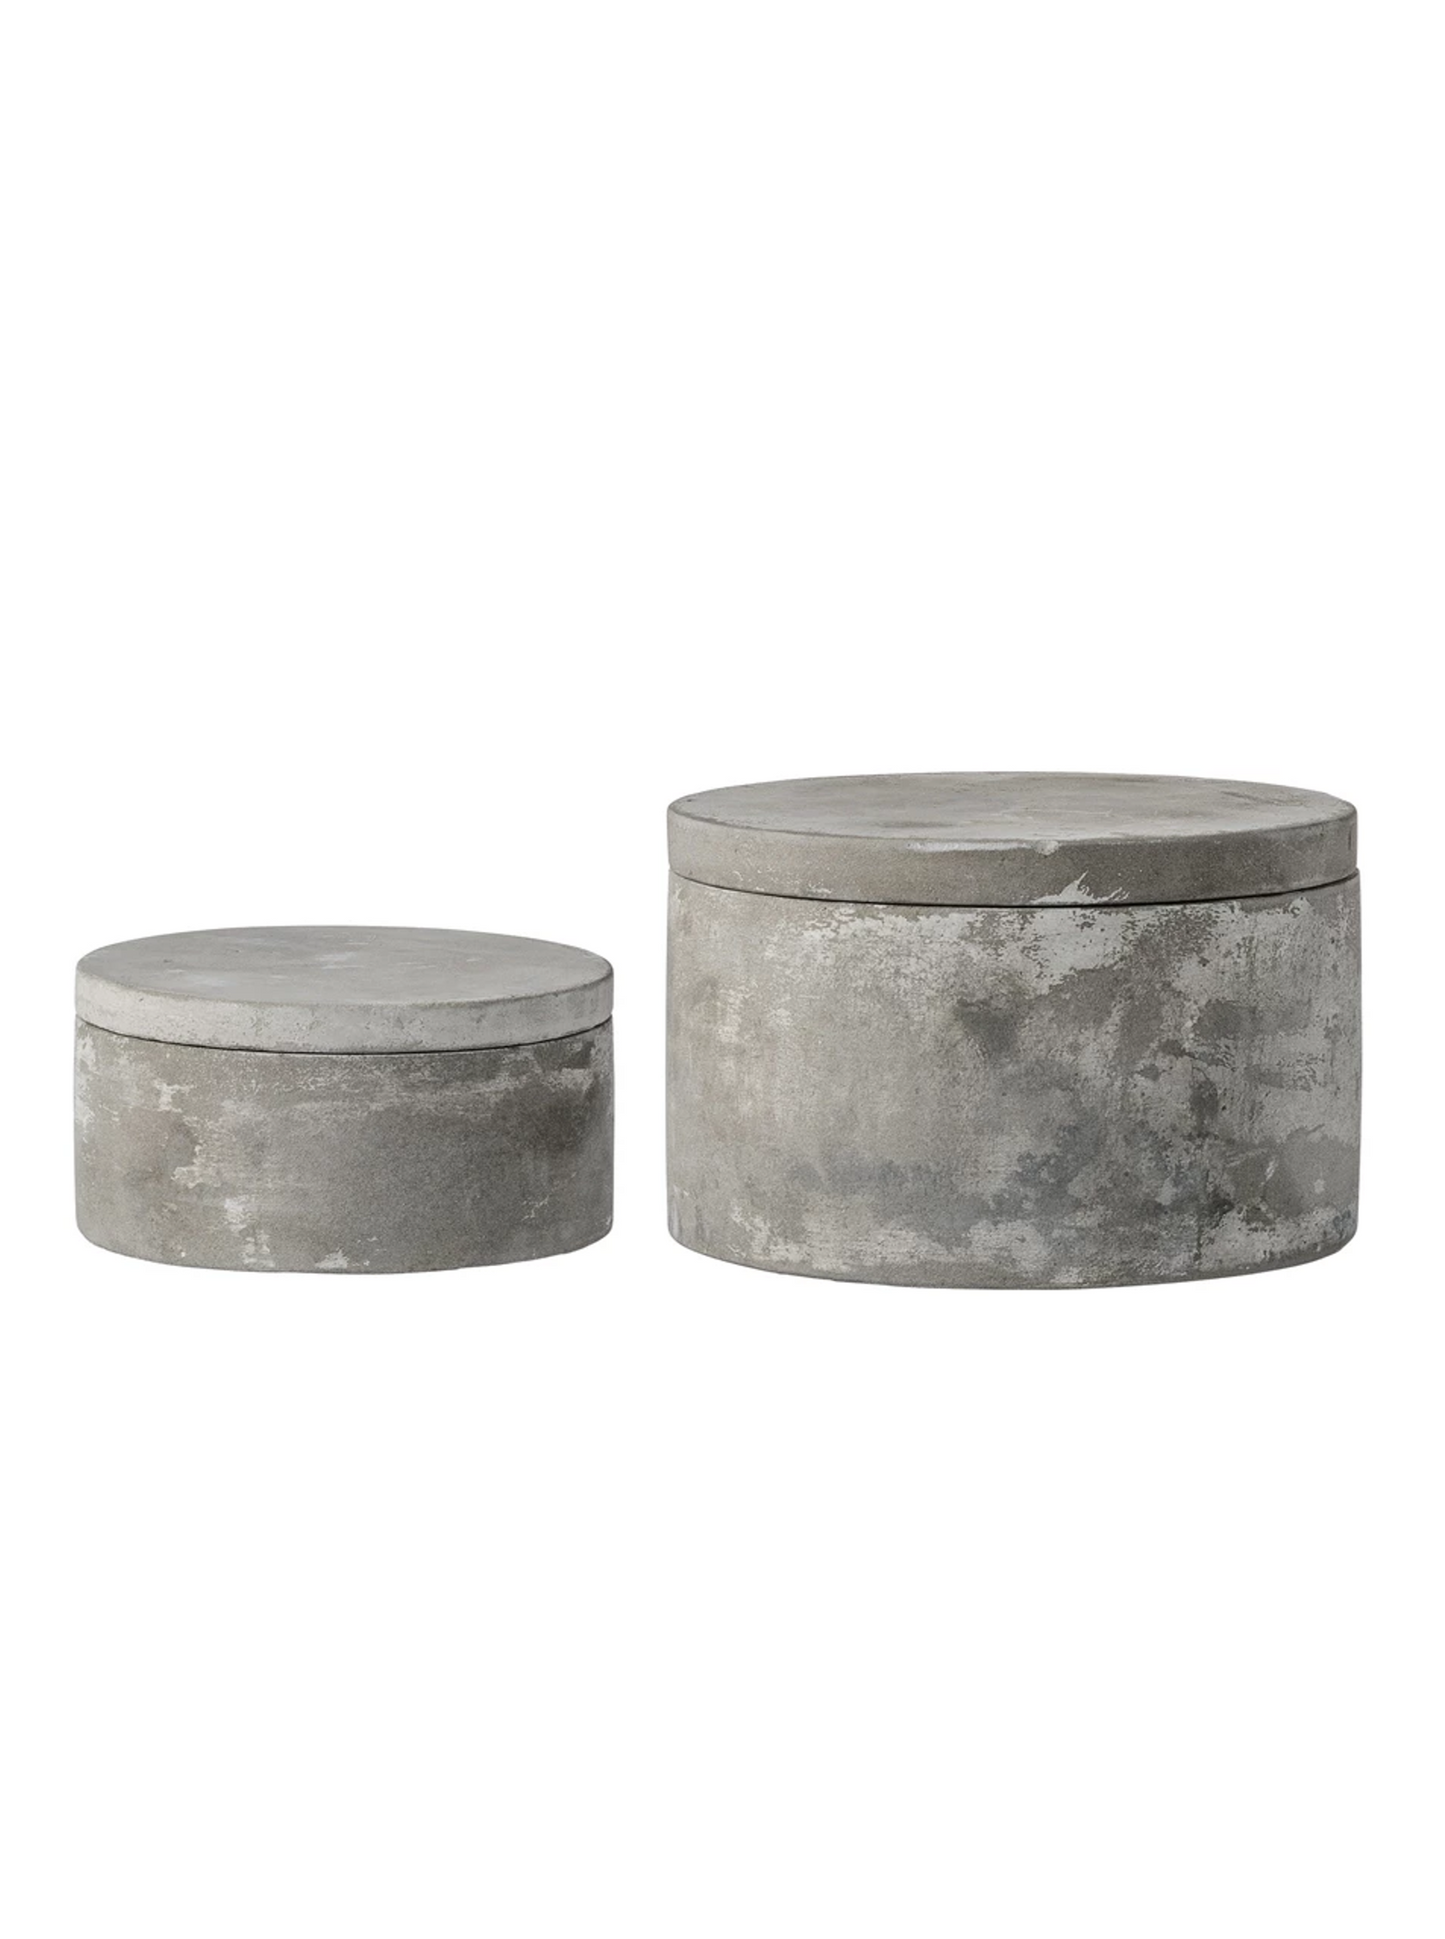 Cement boxes with lids, set of 2